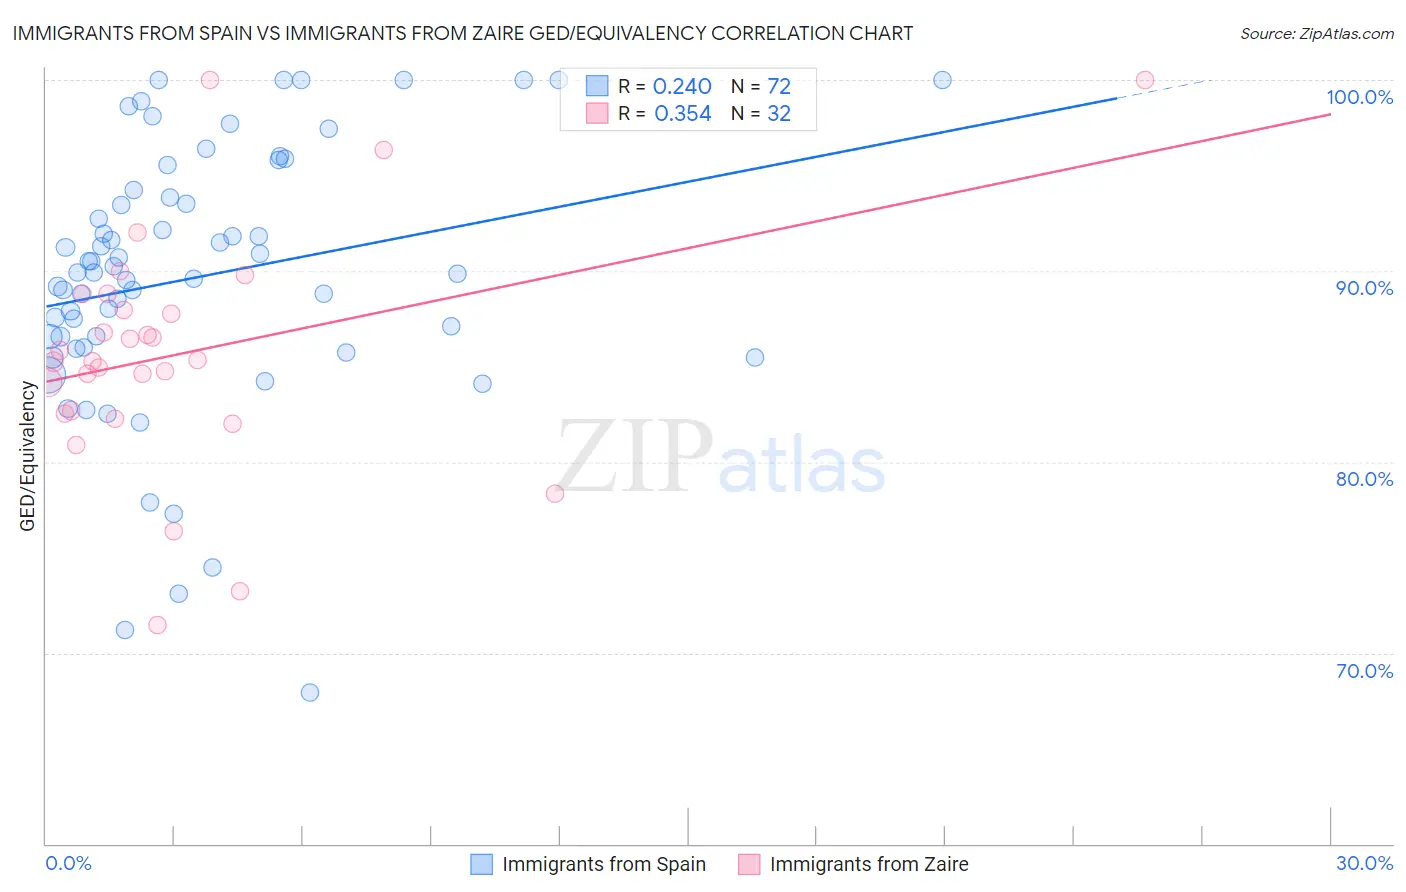 Immigrants from Spain vs Immigrants from Zaire GED/Equivalency